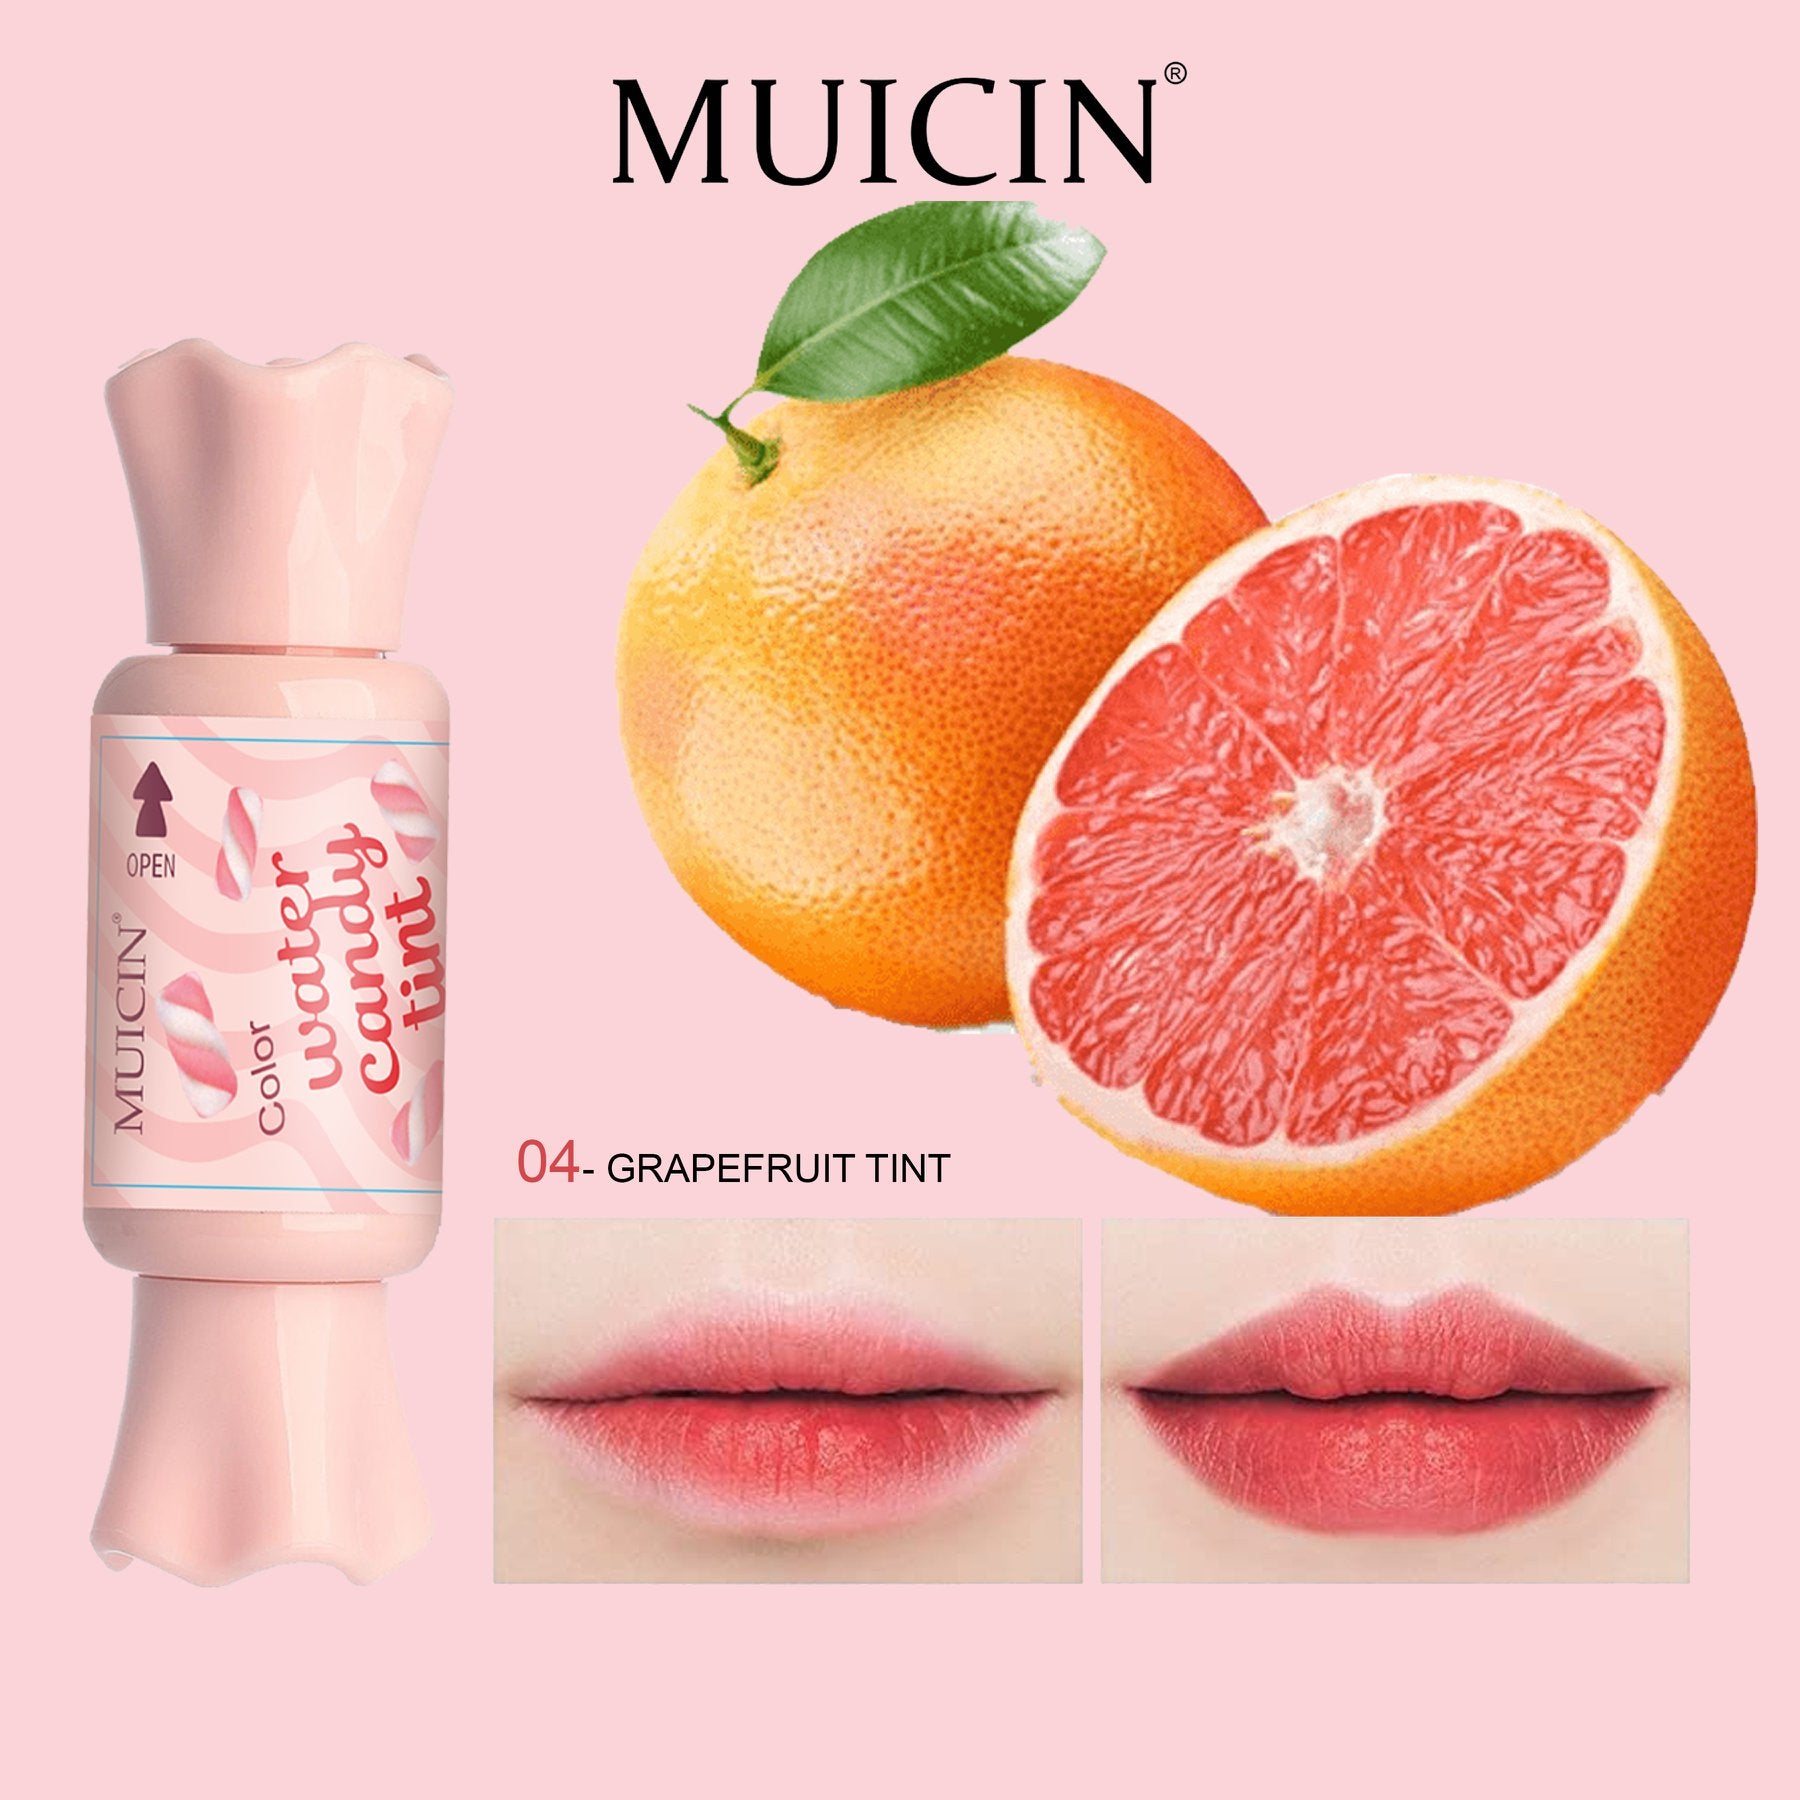 MUICIN WATER CANDY FRUIT TINTS PACK 